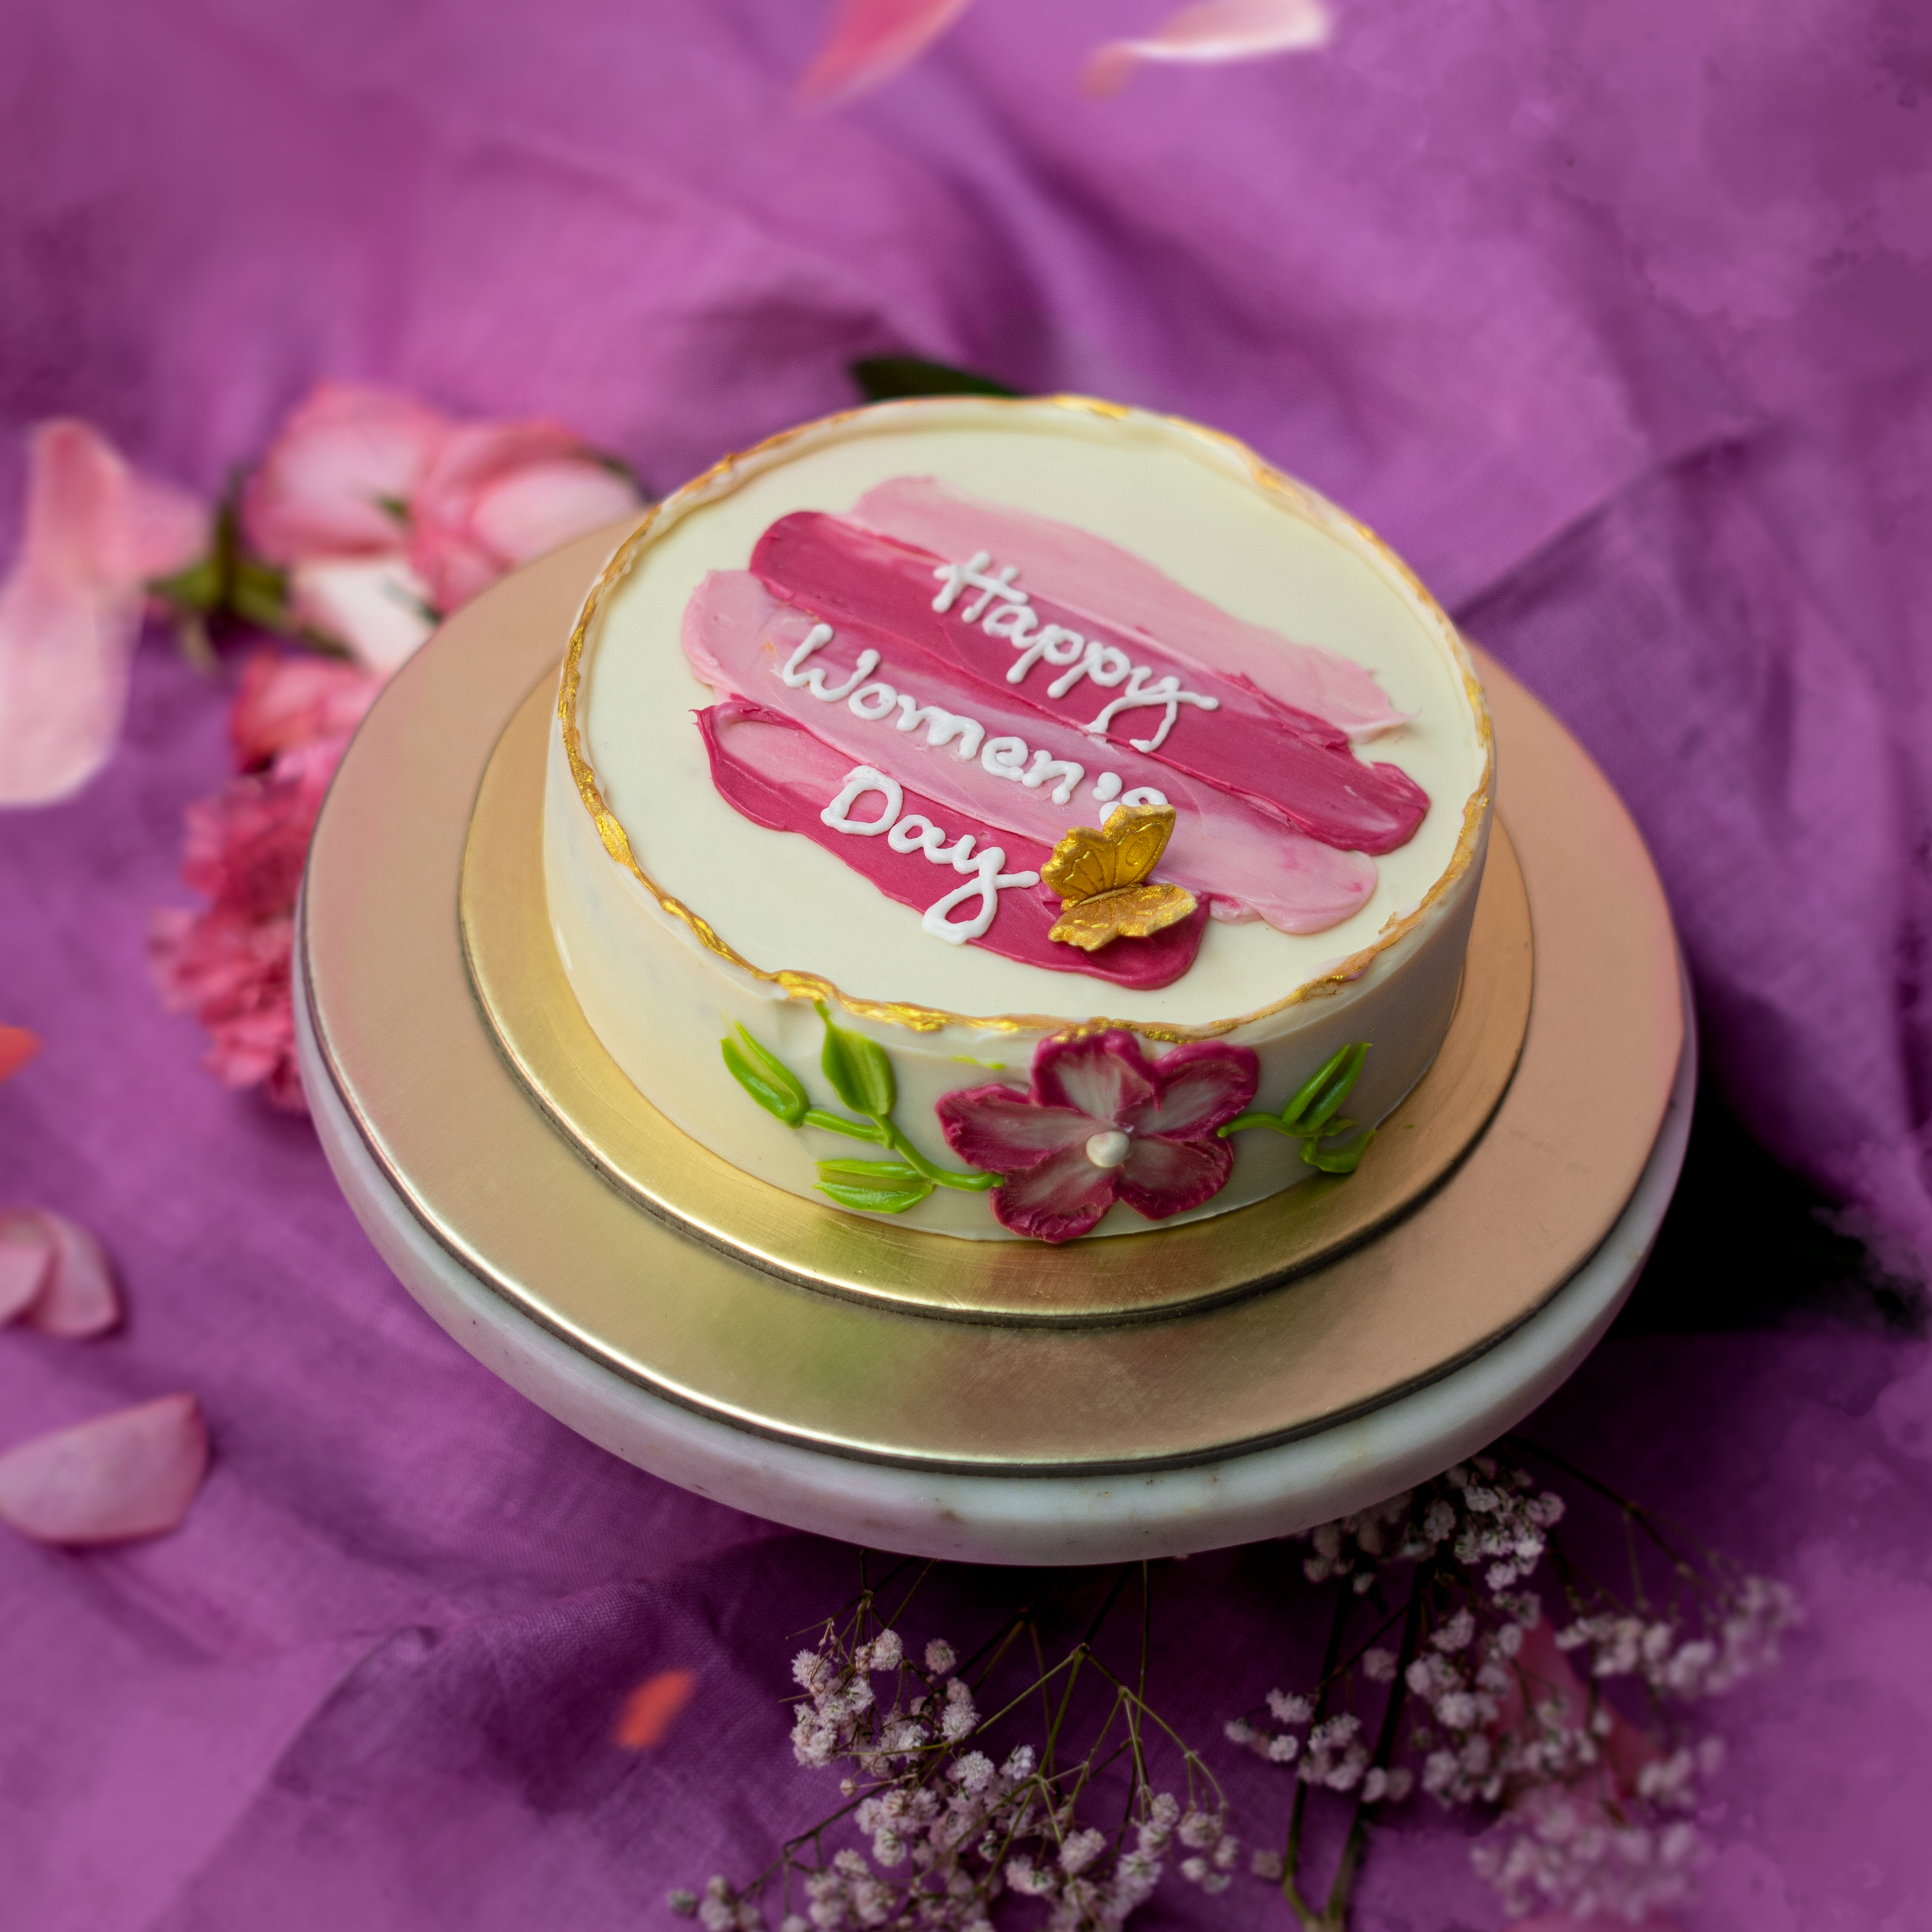 Women's day Special Cake | Best Women's day Cake Designs | Price Rs. 899 -  IndiaGiftsKart